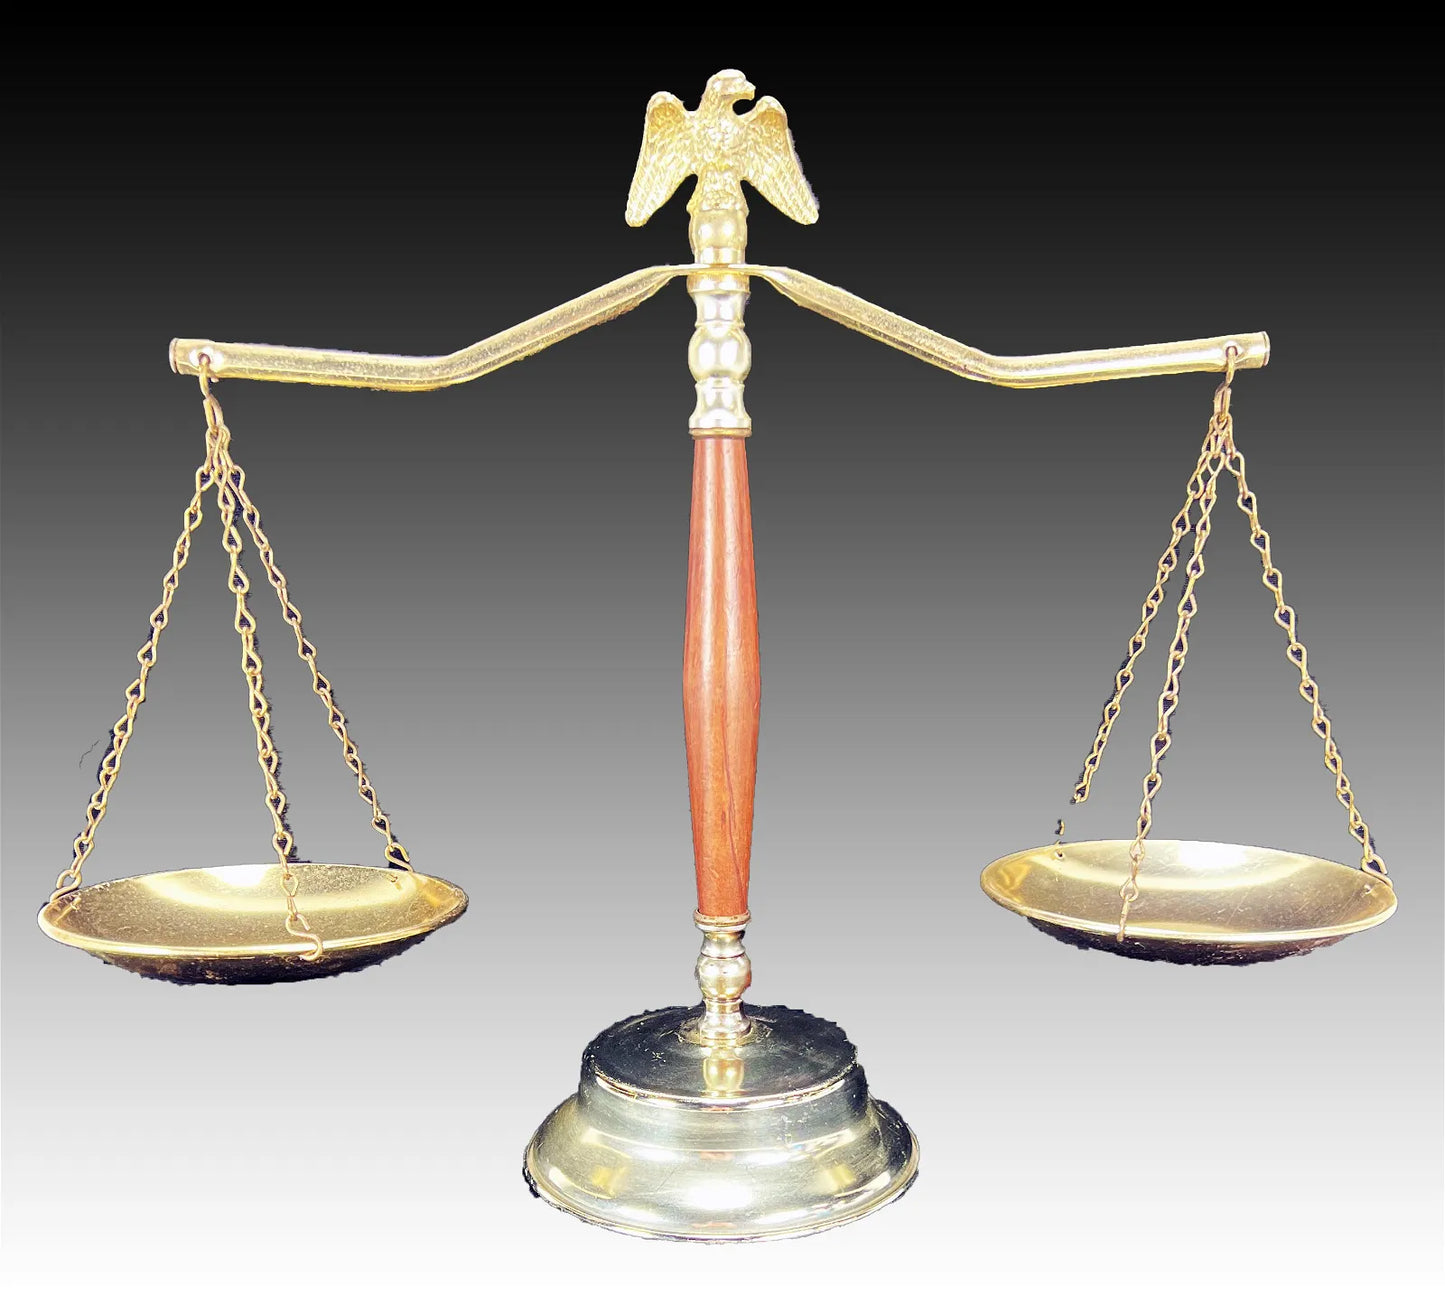 DECORATIVE SCALES OF JUSTICE